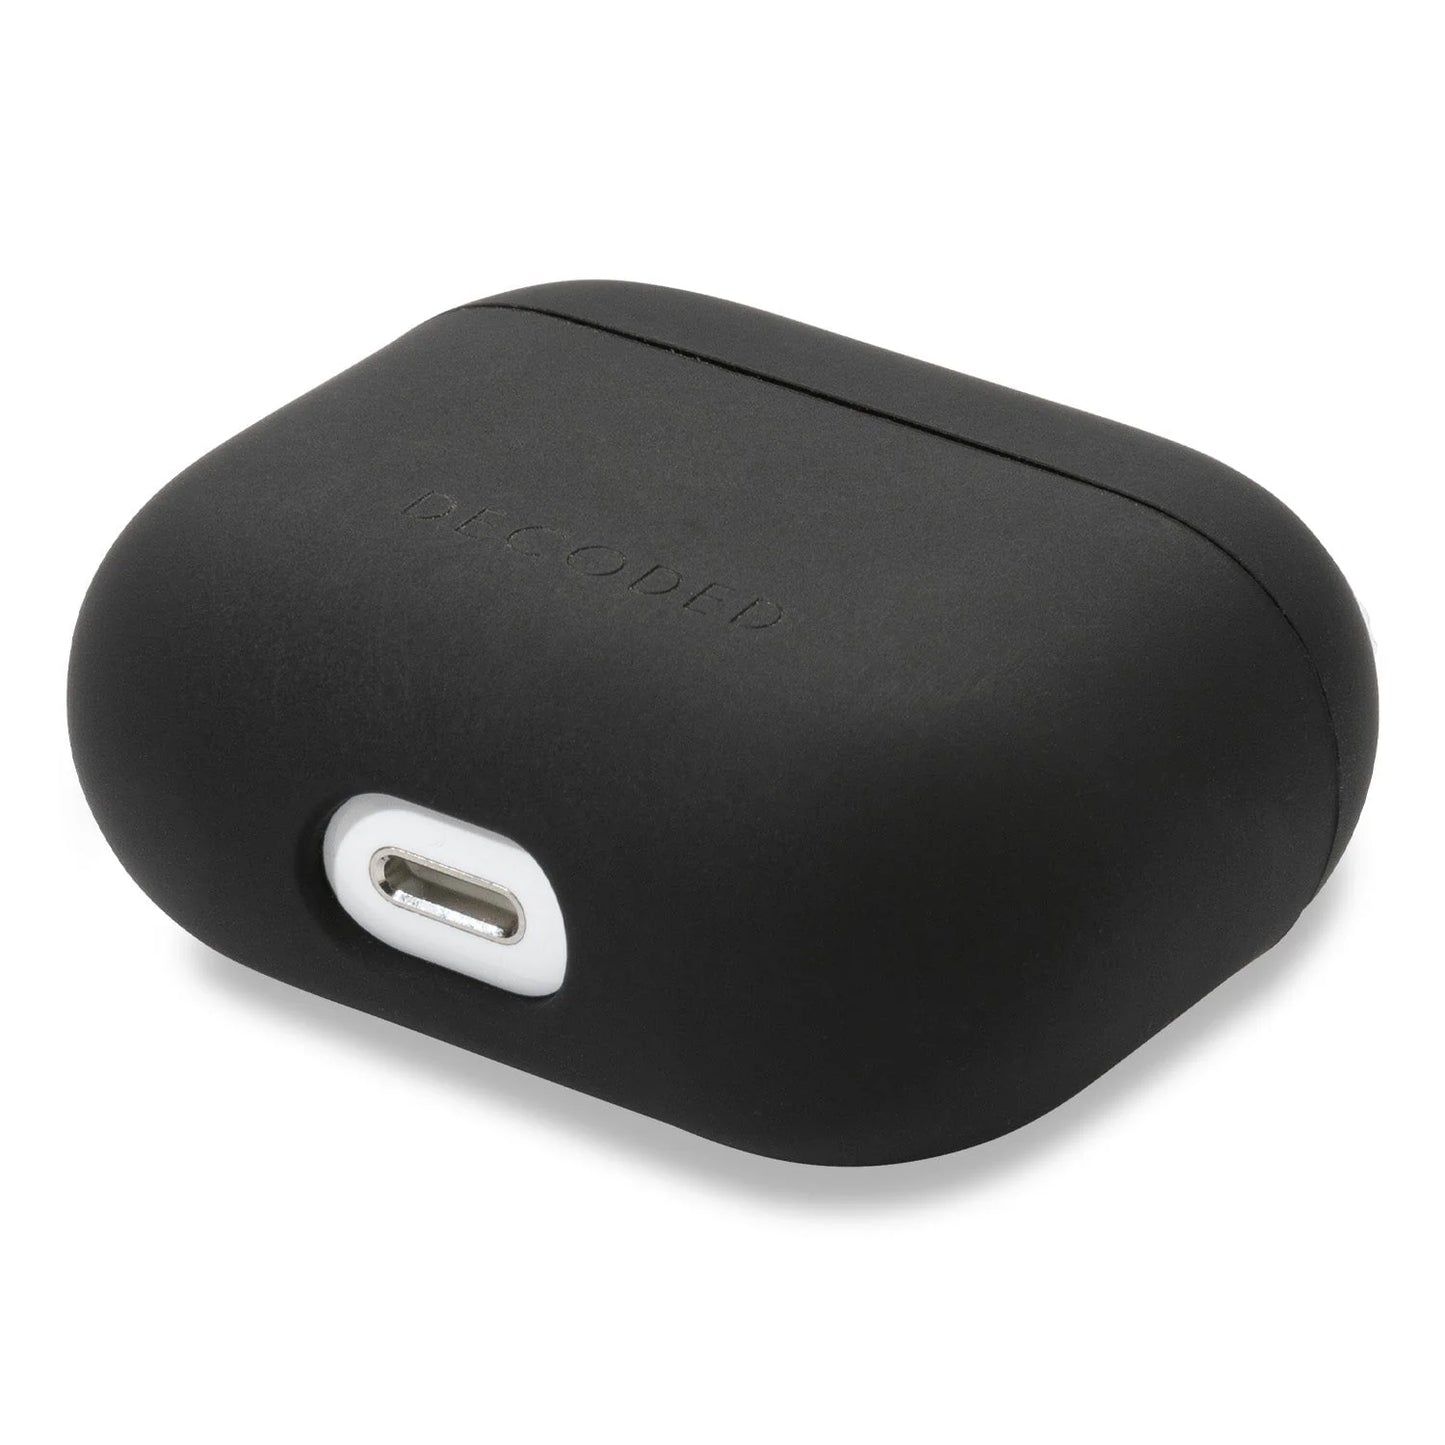 EOL Decoded Silicone Aircase pour AirPods (3e gén.) - Charcoal